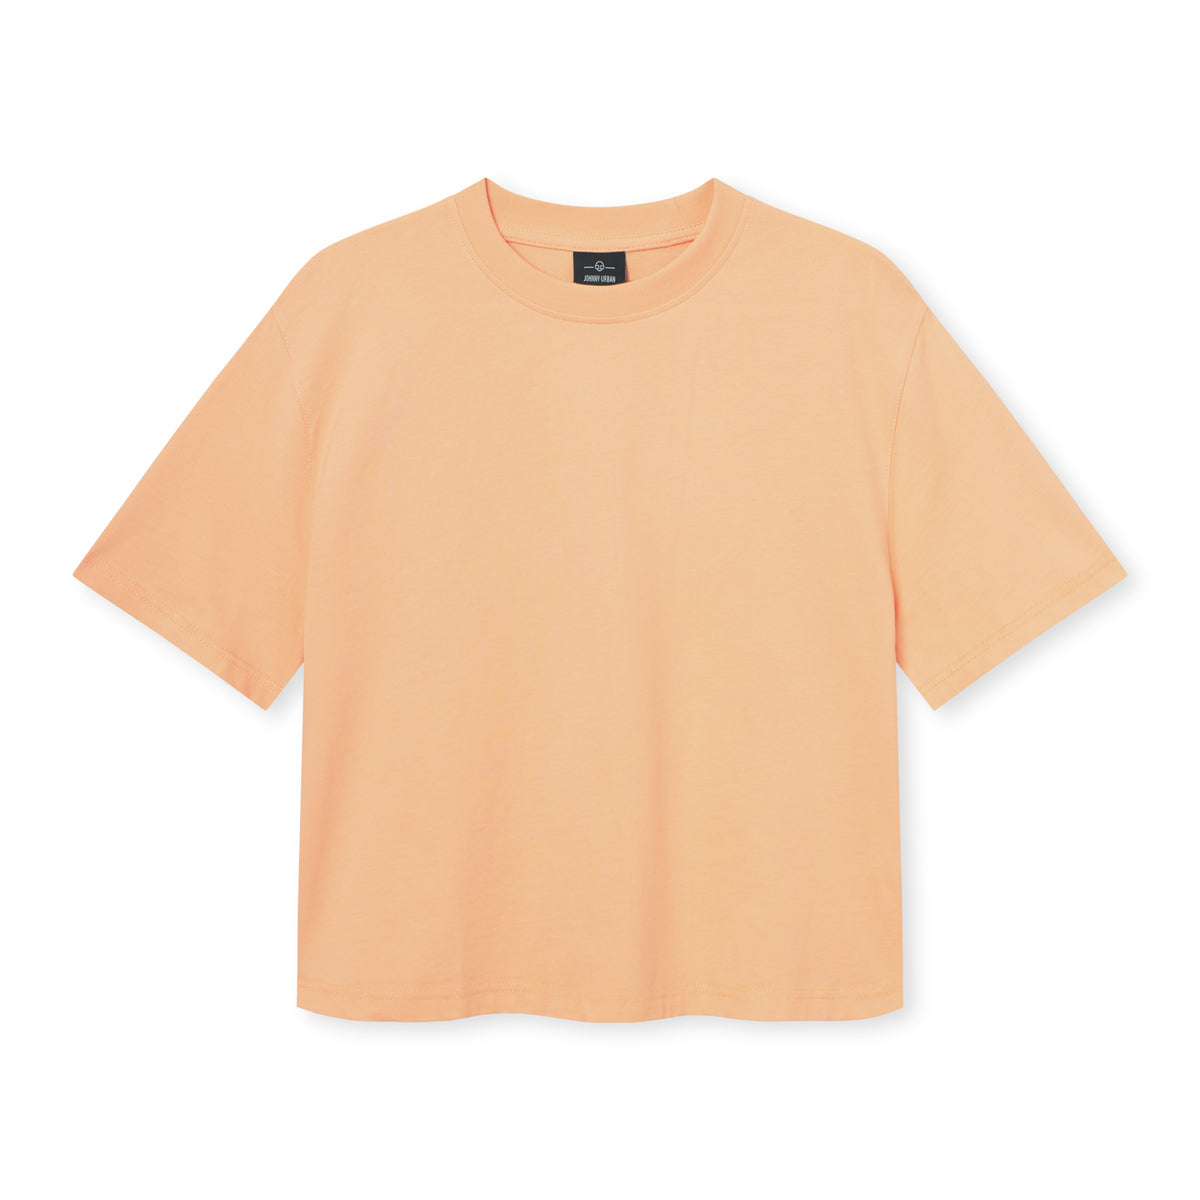 Cropped T-Shirt "Zoey"